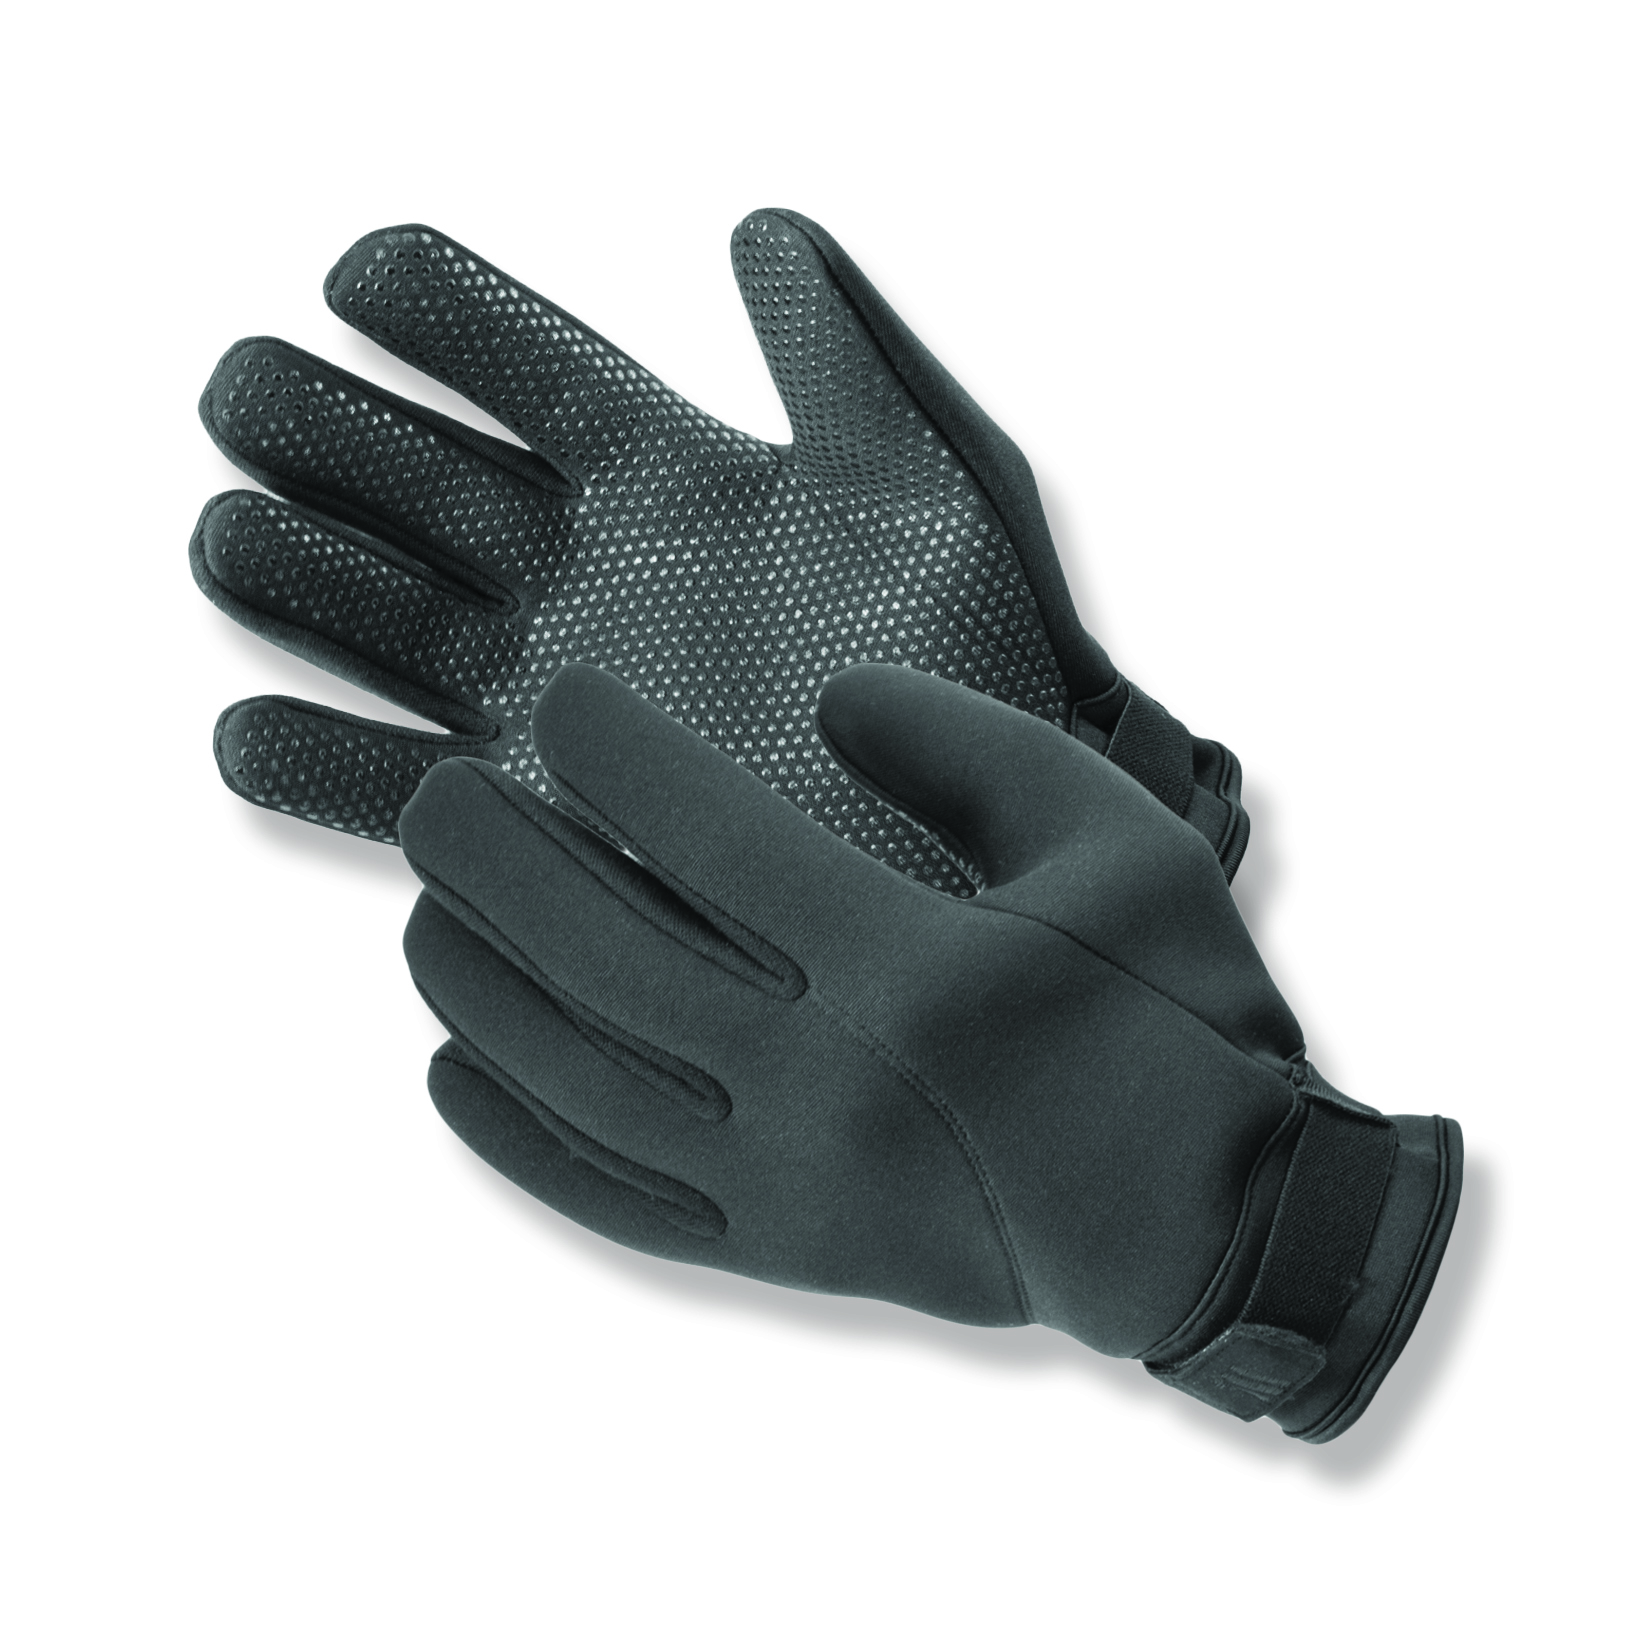 Expert™ Cold Weather Neoprene Uniform Gloves feature gripper dots on the palms